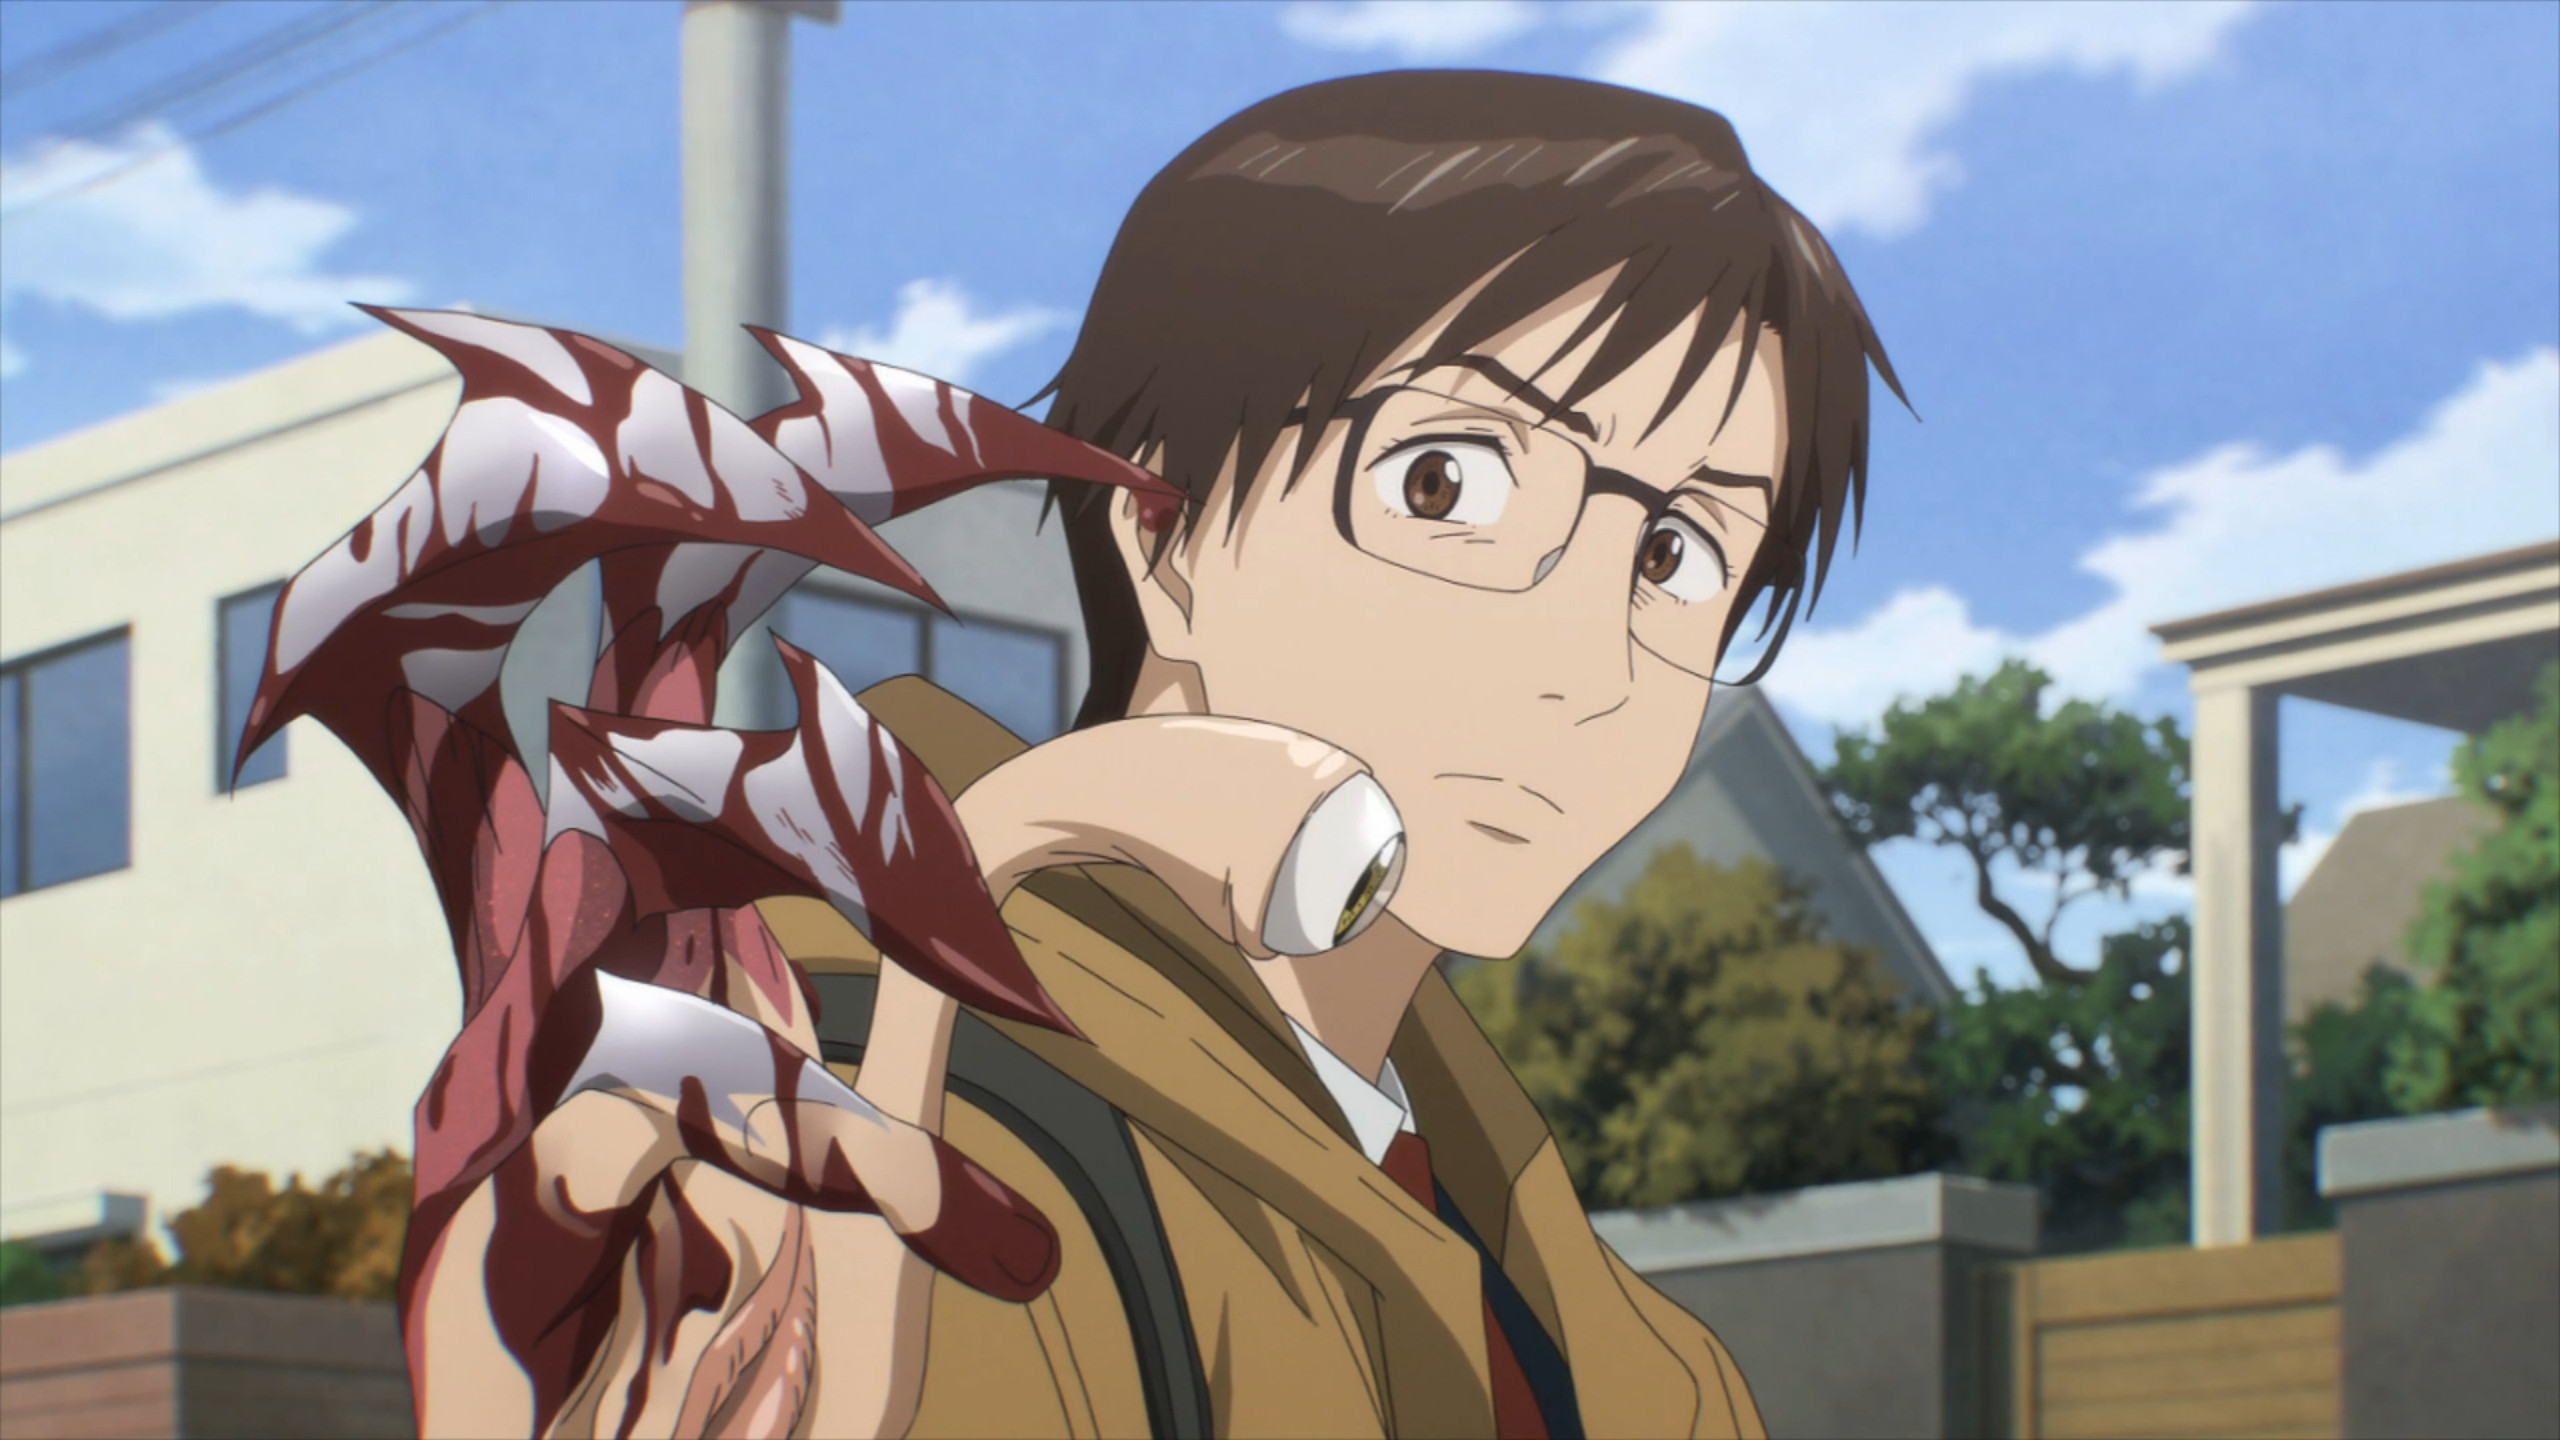 Parasyte-The Maxim-Complete Collection [Blu-Ray]: Amazon.in: Kenichi  Shimizu: Movies & TV Shows